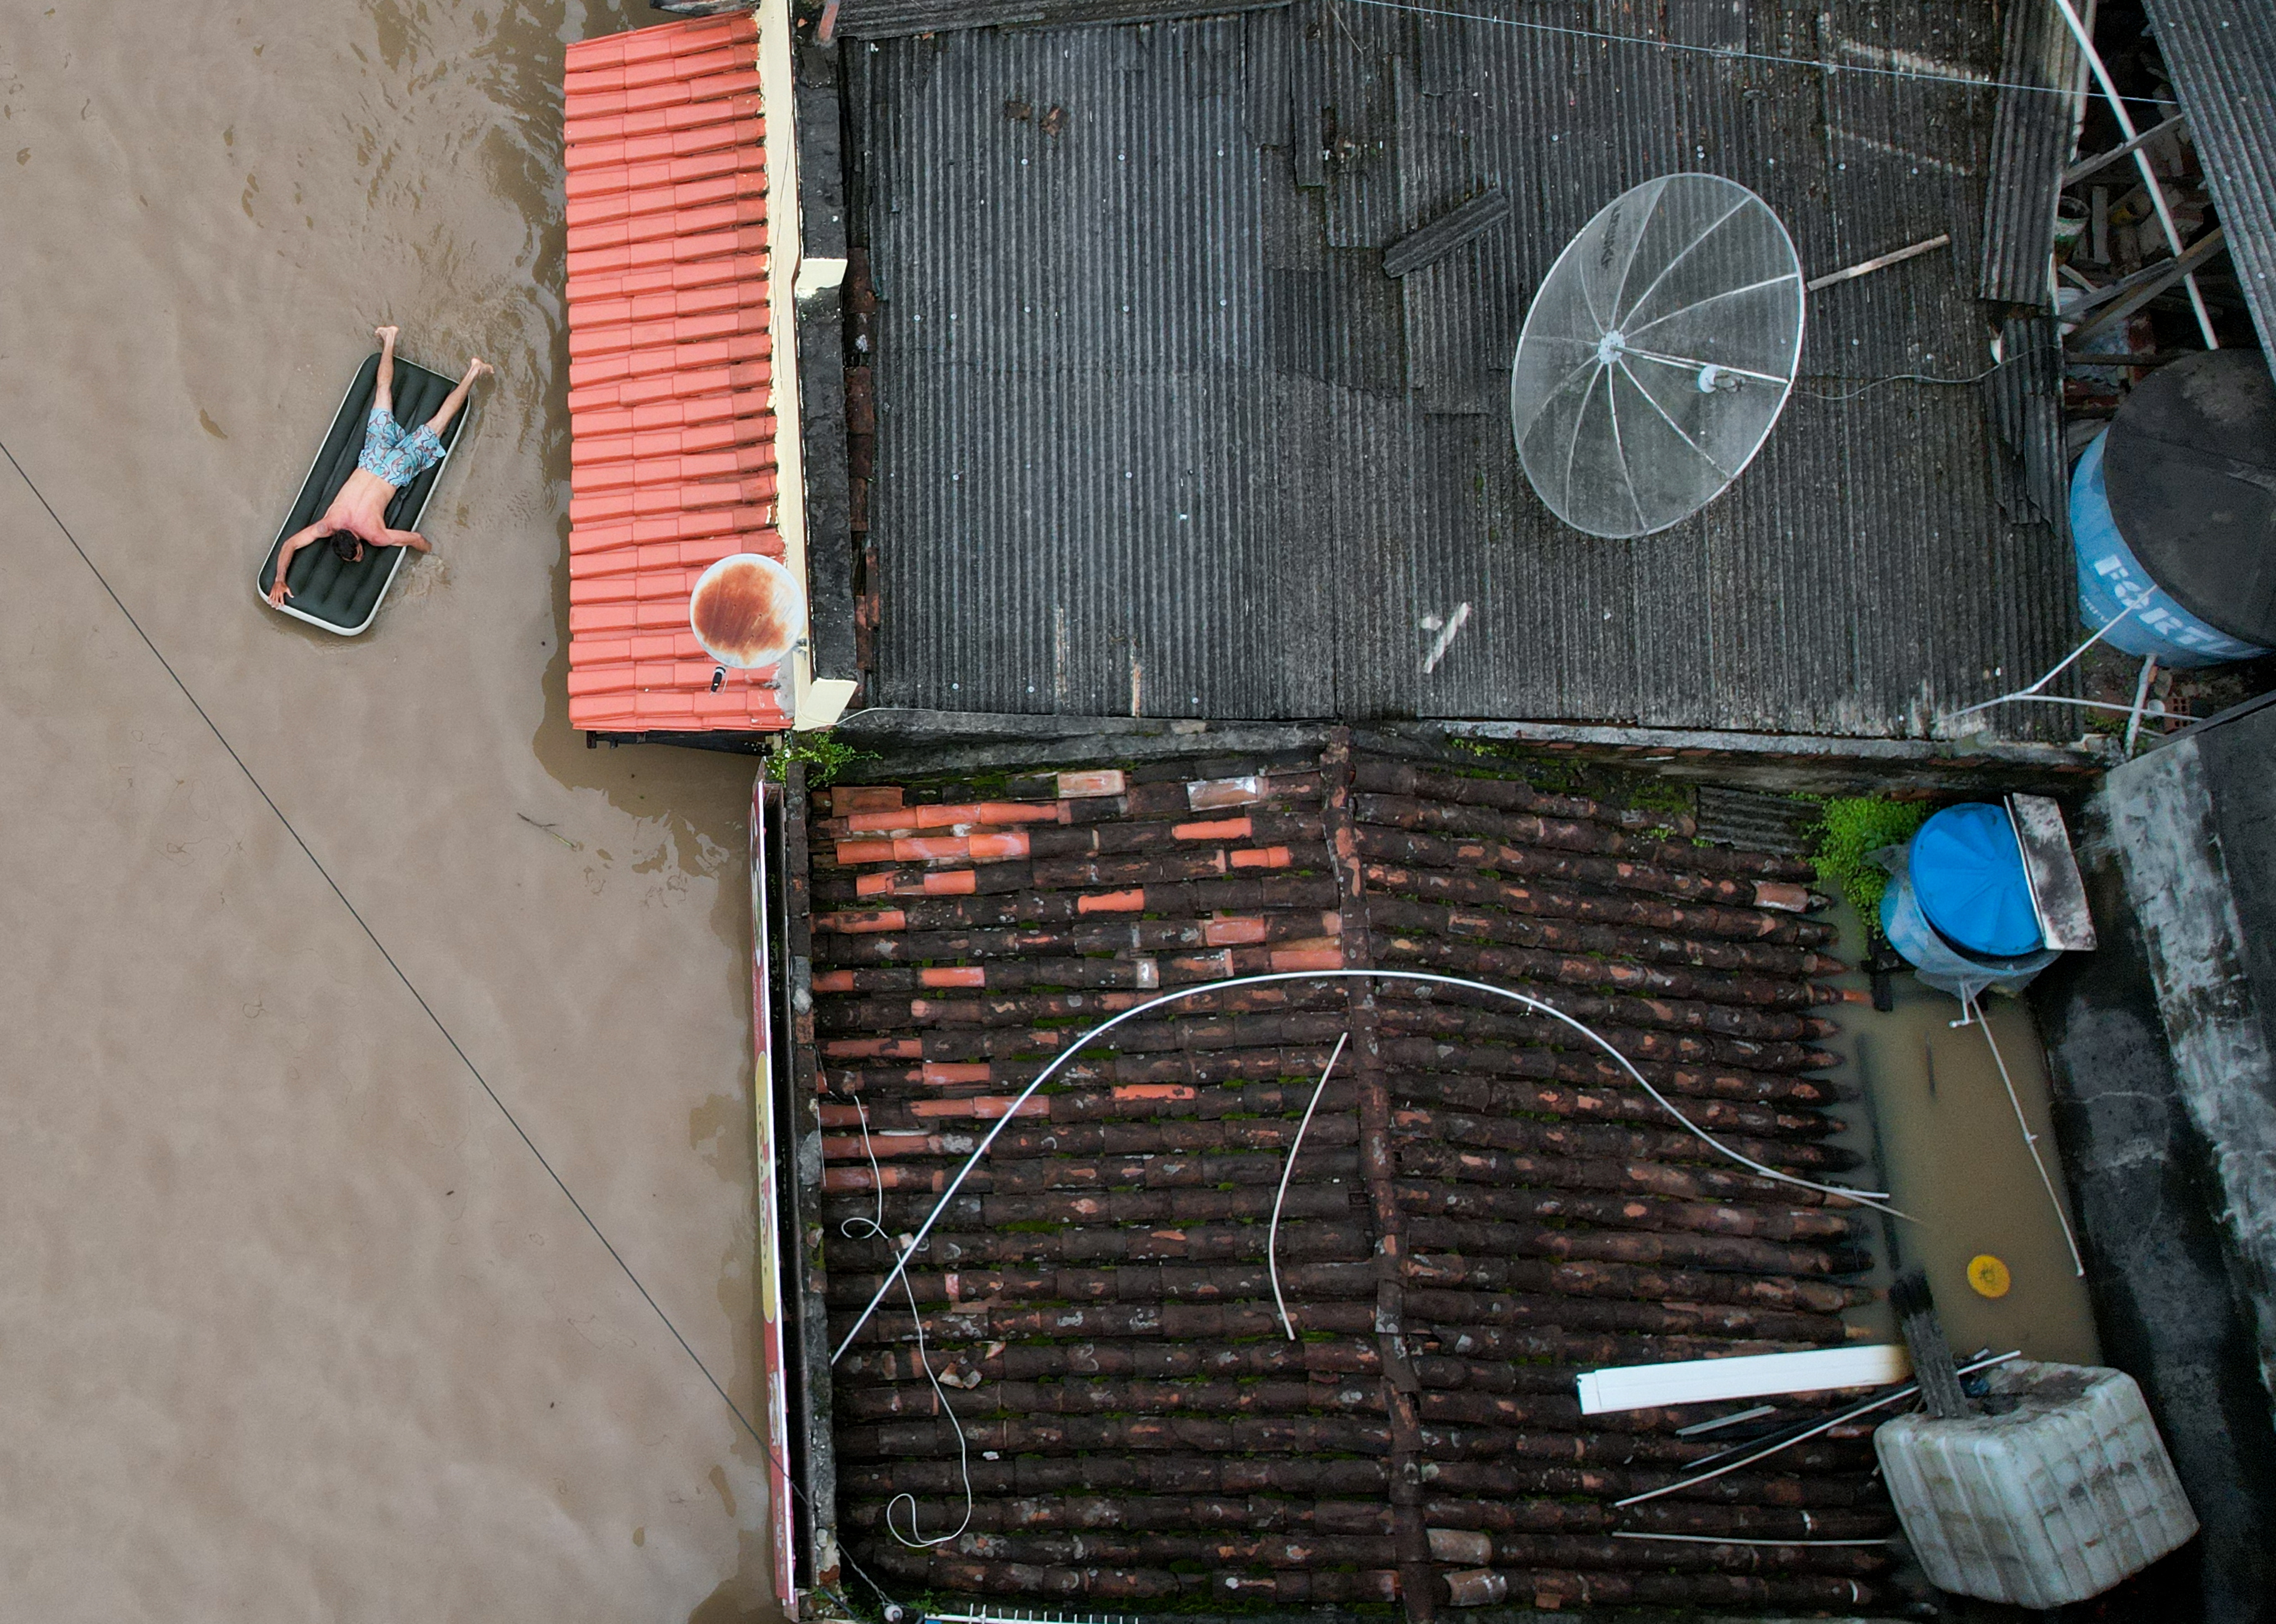 A man uses an inflatable mattress during flooding caused by the overflowing Cachoeira river in Itabuna, Bahia state, Brazil, December 26, 2021. Picture taken with a drone. REUTERS/Leonardo Benassatto